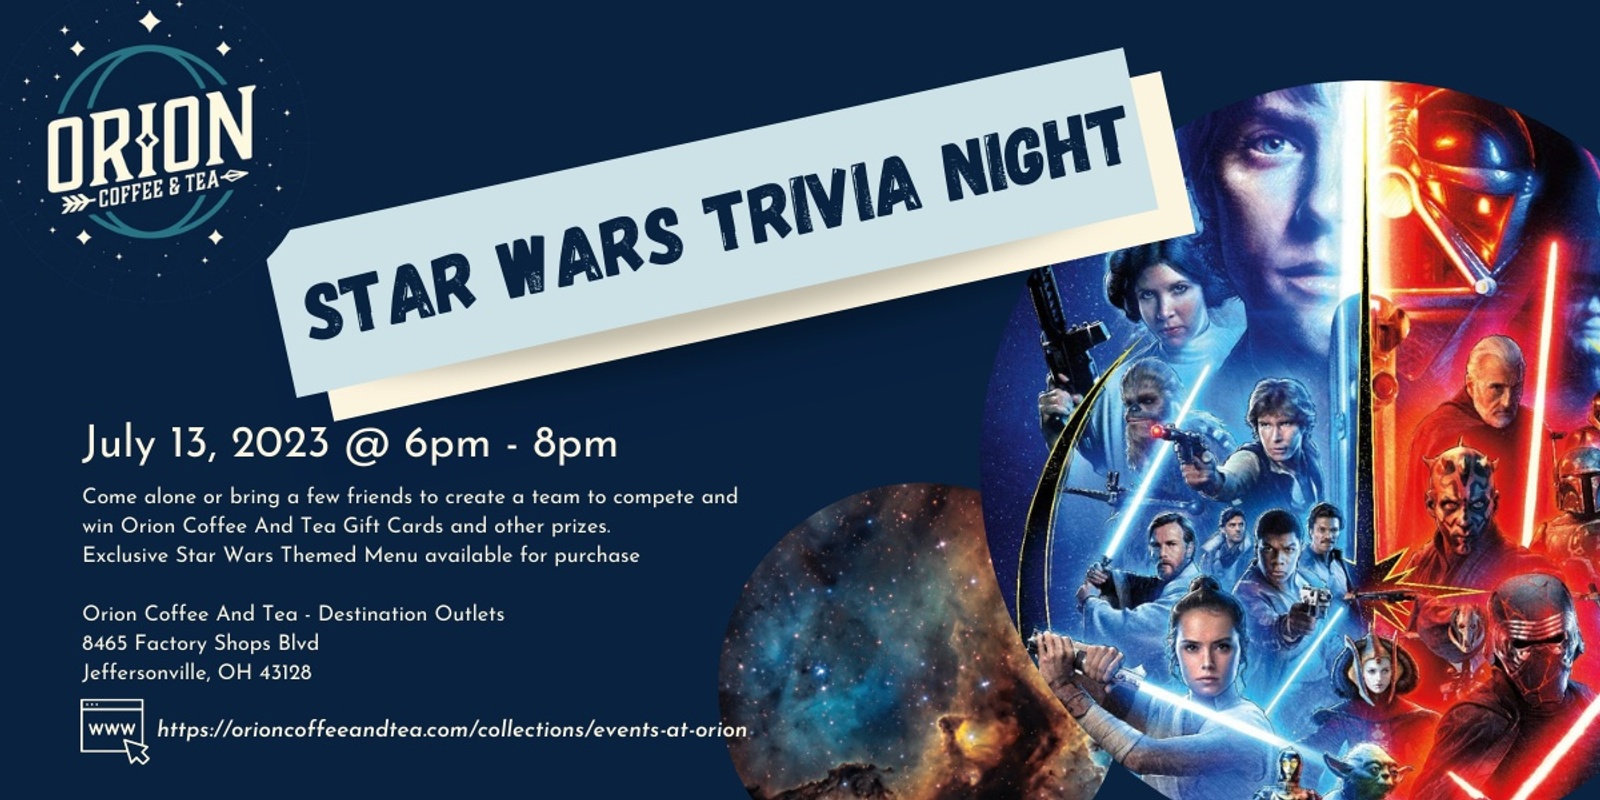 Star Wars Trivia from This Week! In Star Wars